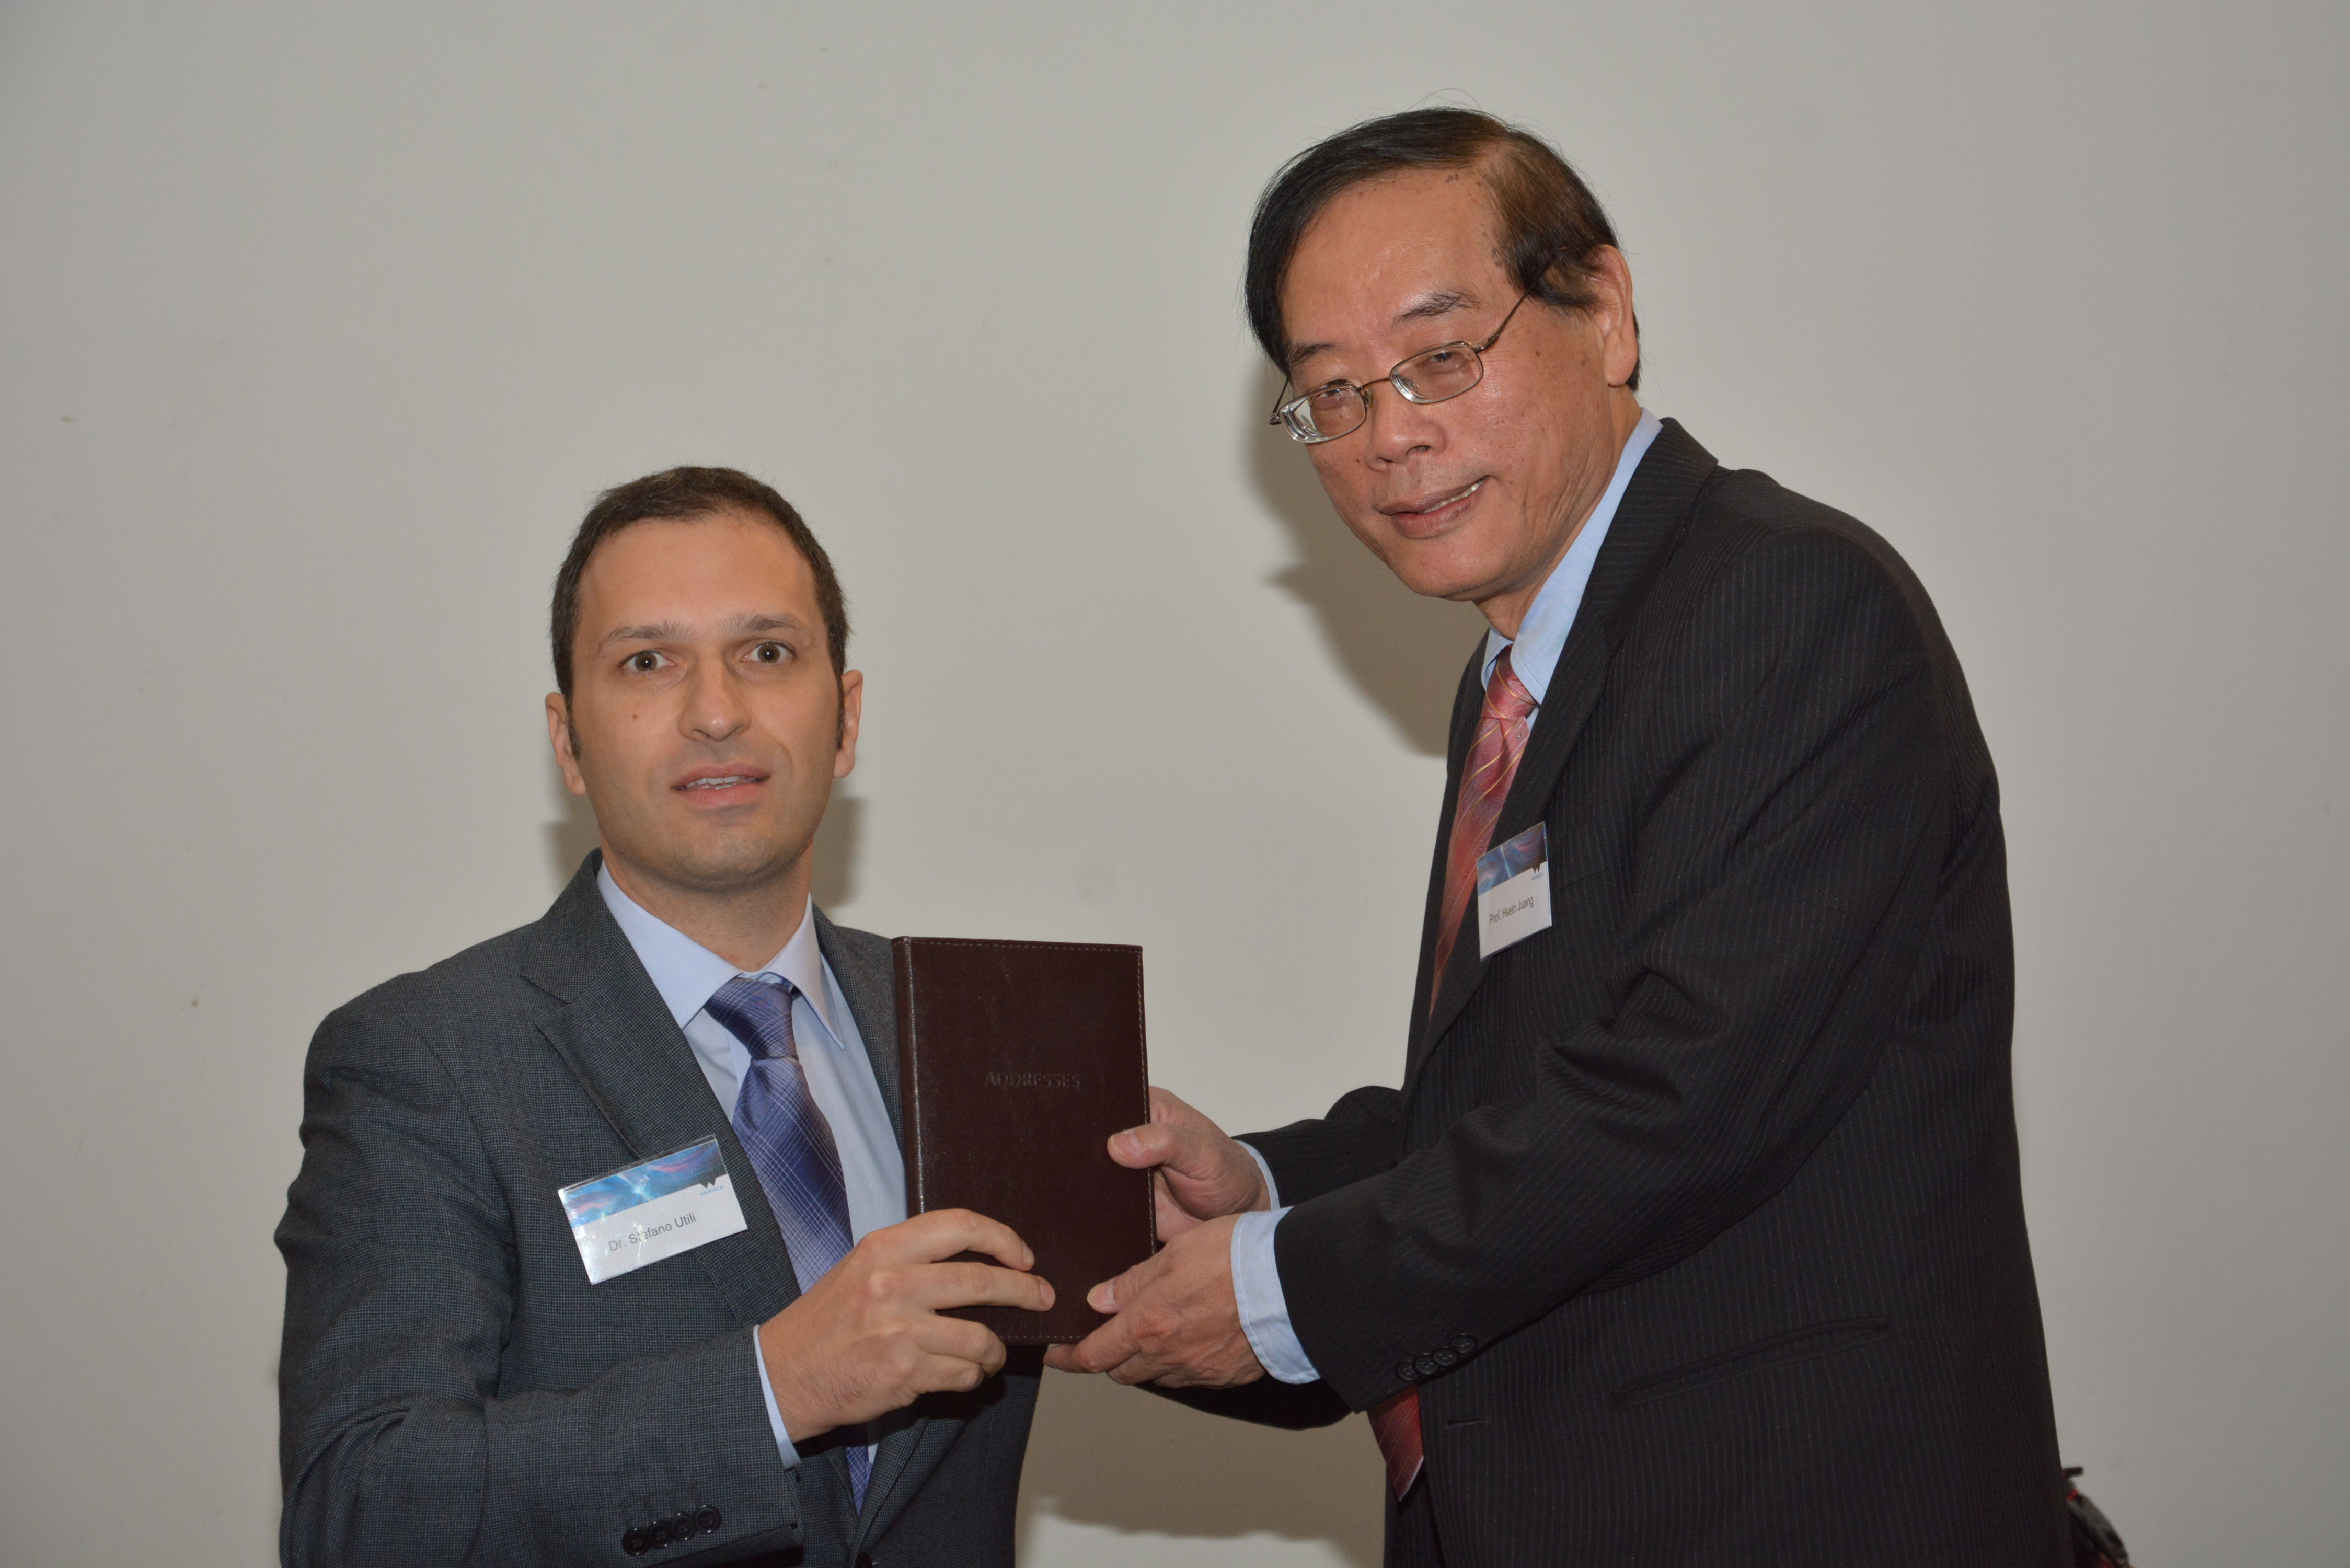 Dr. C. Hsein Juang receiving a gift for his participation from Dr Stefano Utili